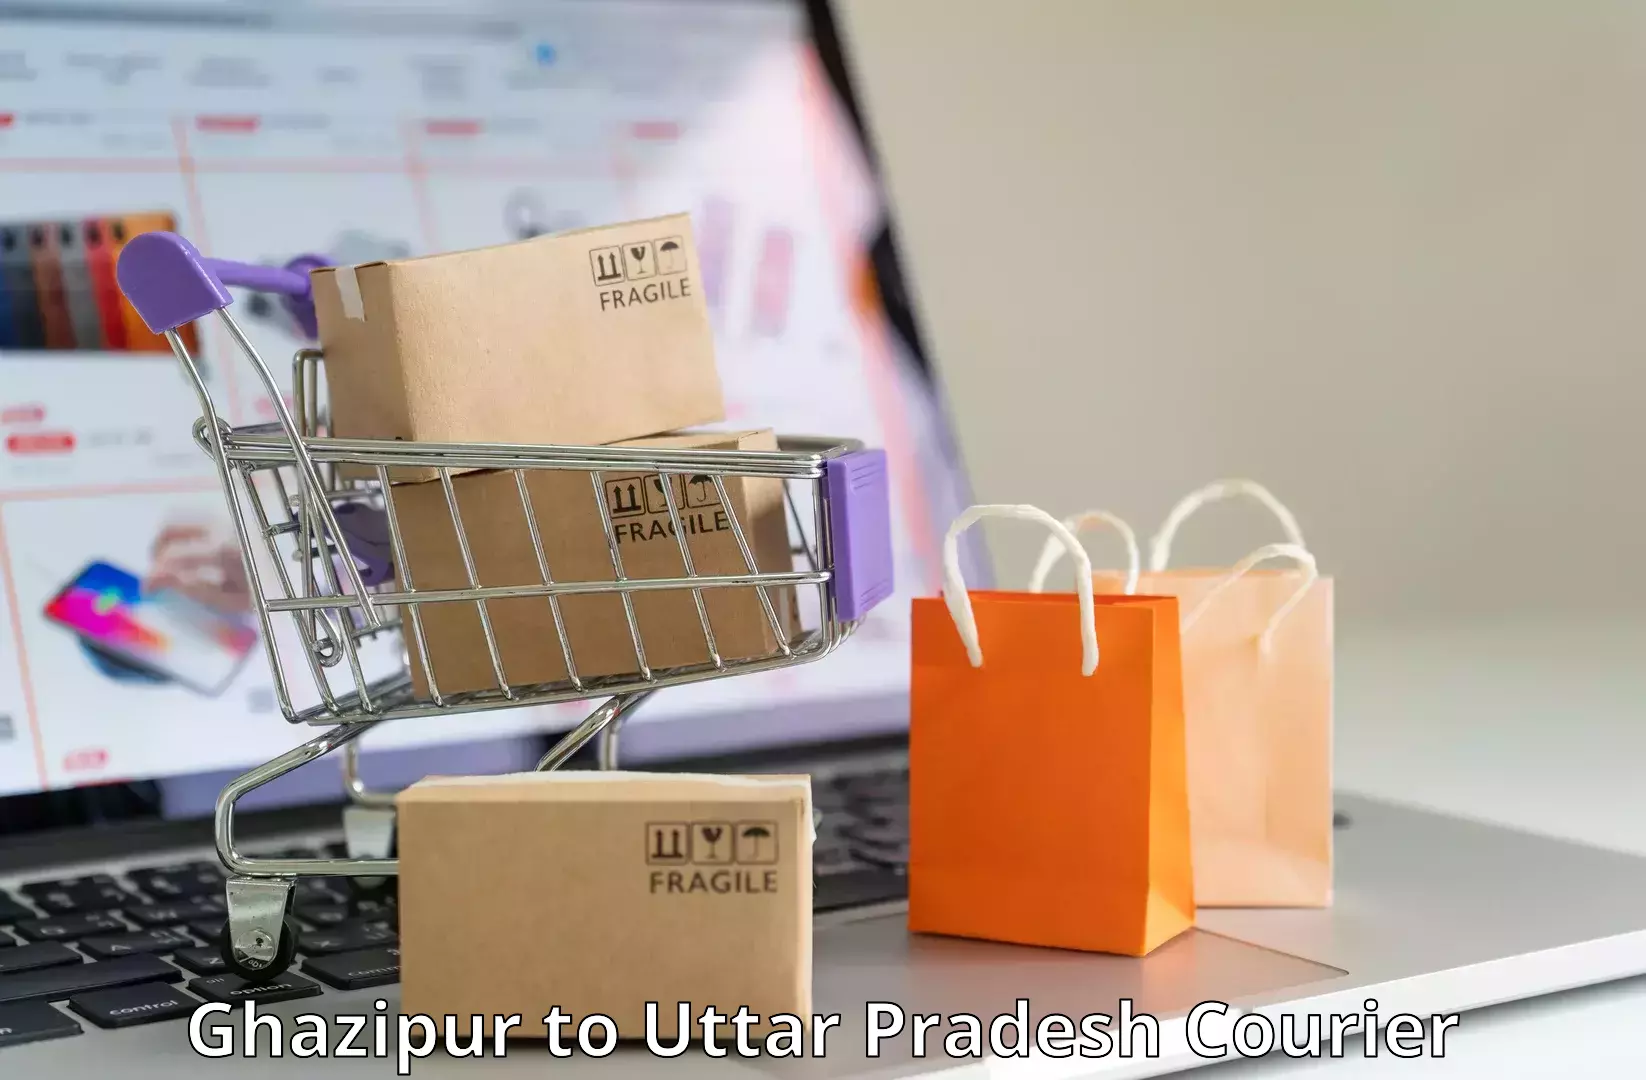 Express delivery network Ghazipur to Uttar Pradesh